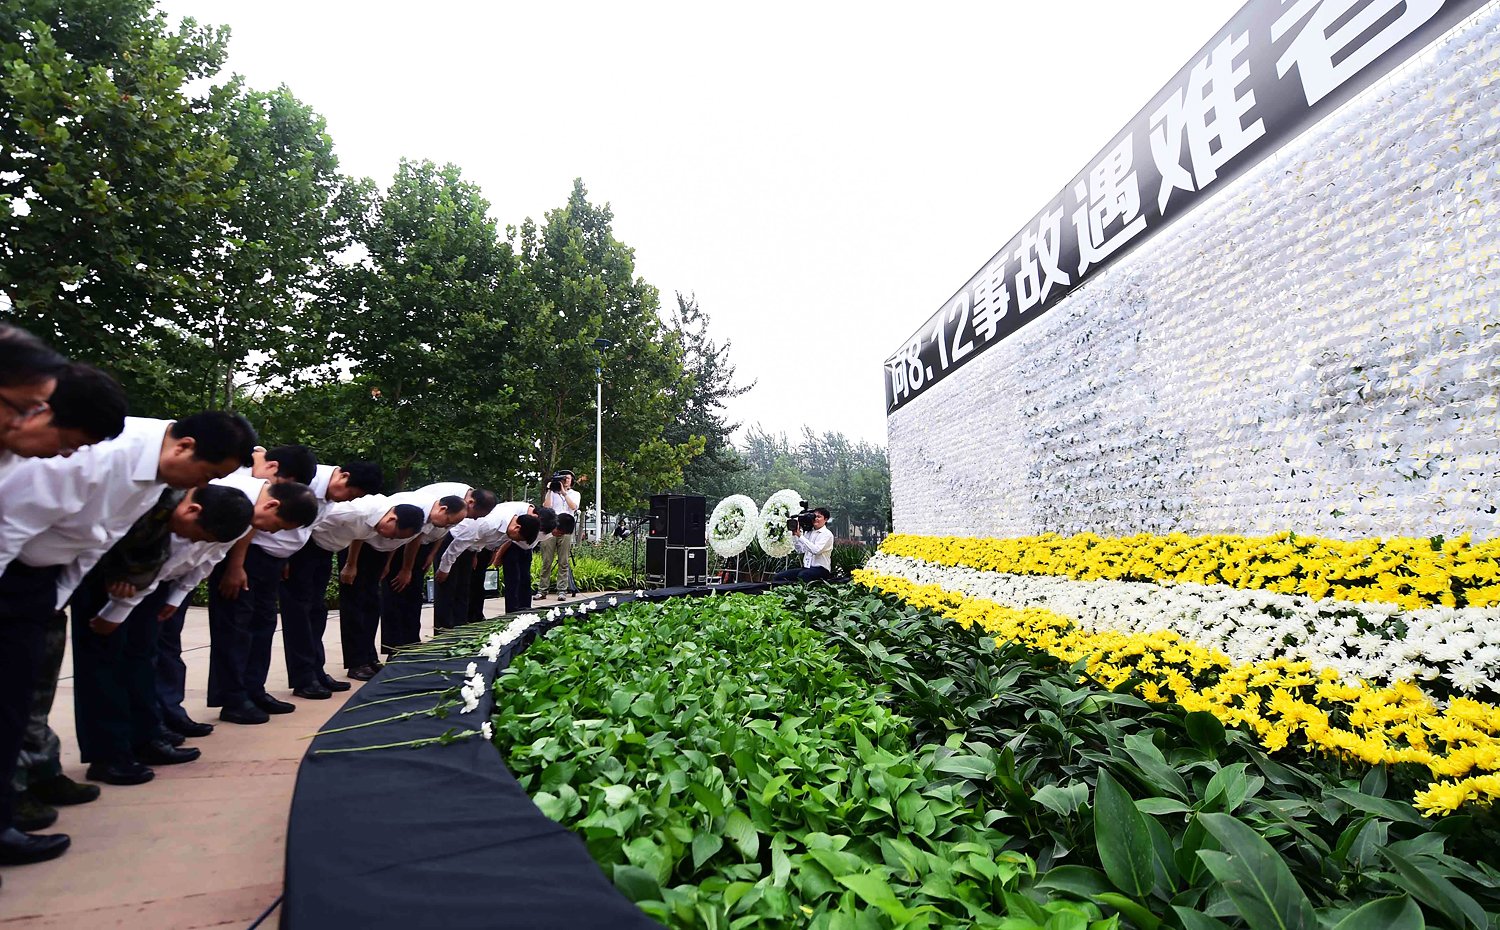 Mourners pay respects at a ceremony in a Binhai New Area park. Photo: Xinhua